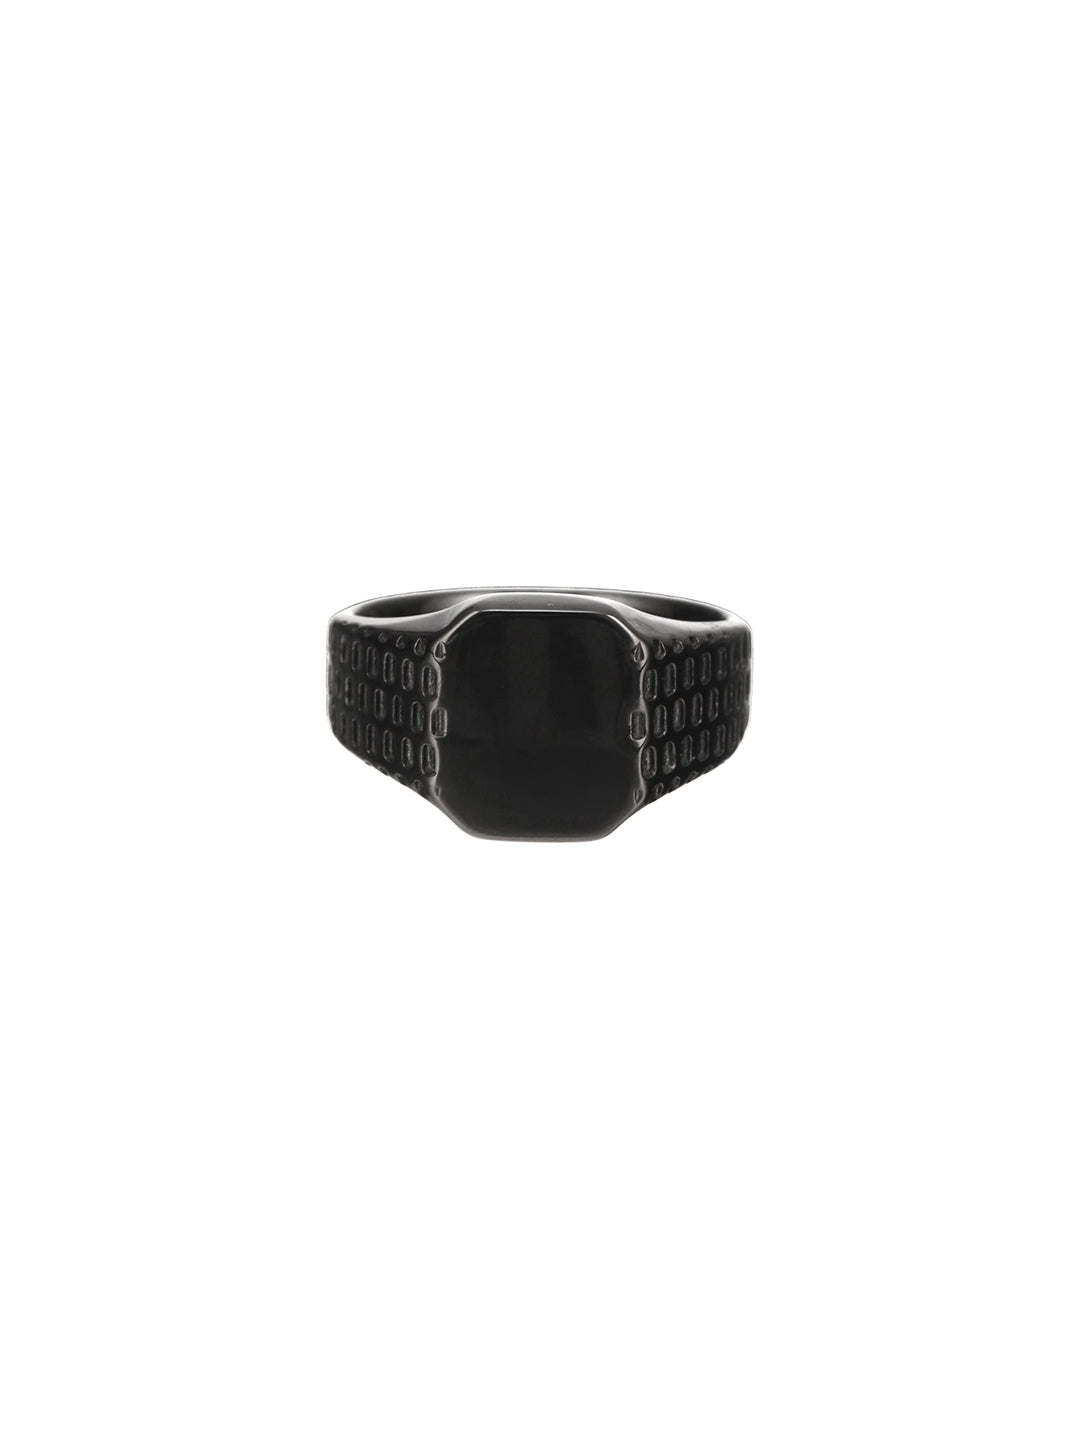 Jazz And Sizzle Men Black Bold & Textured Stainless Steel Band Finger Ring - Jazzandsizzle